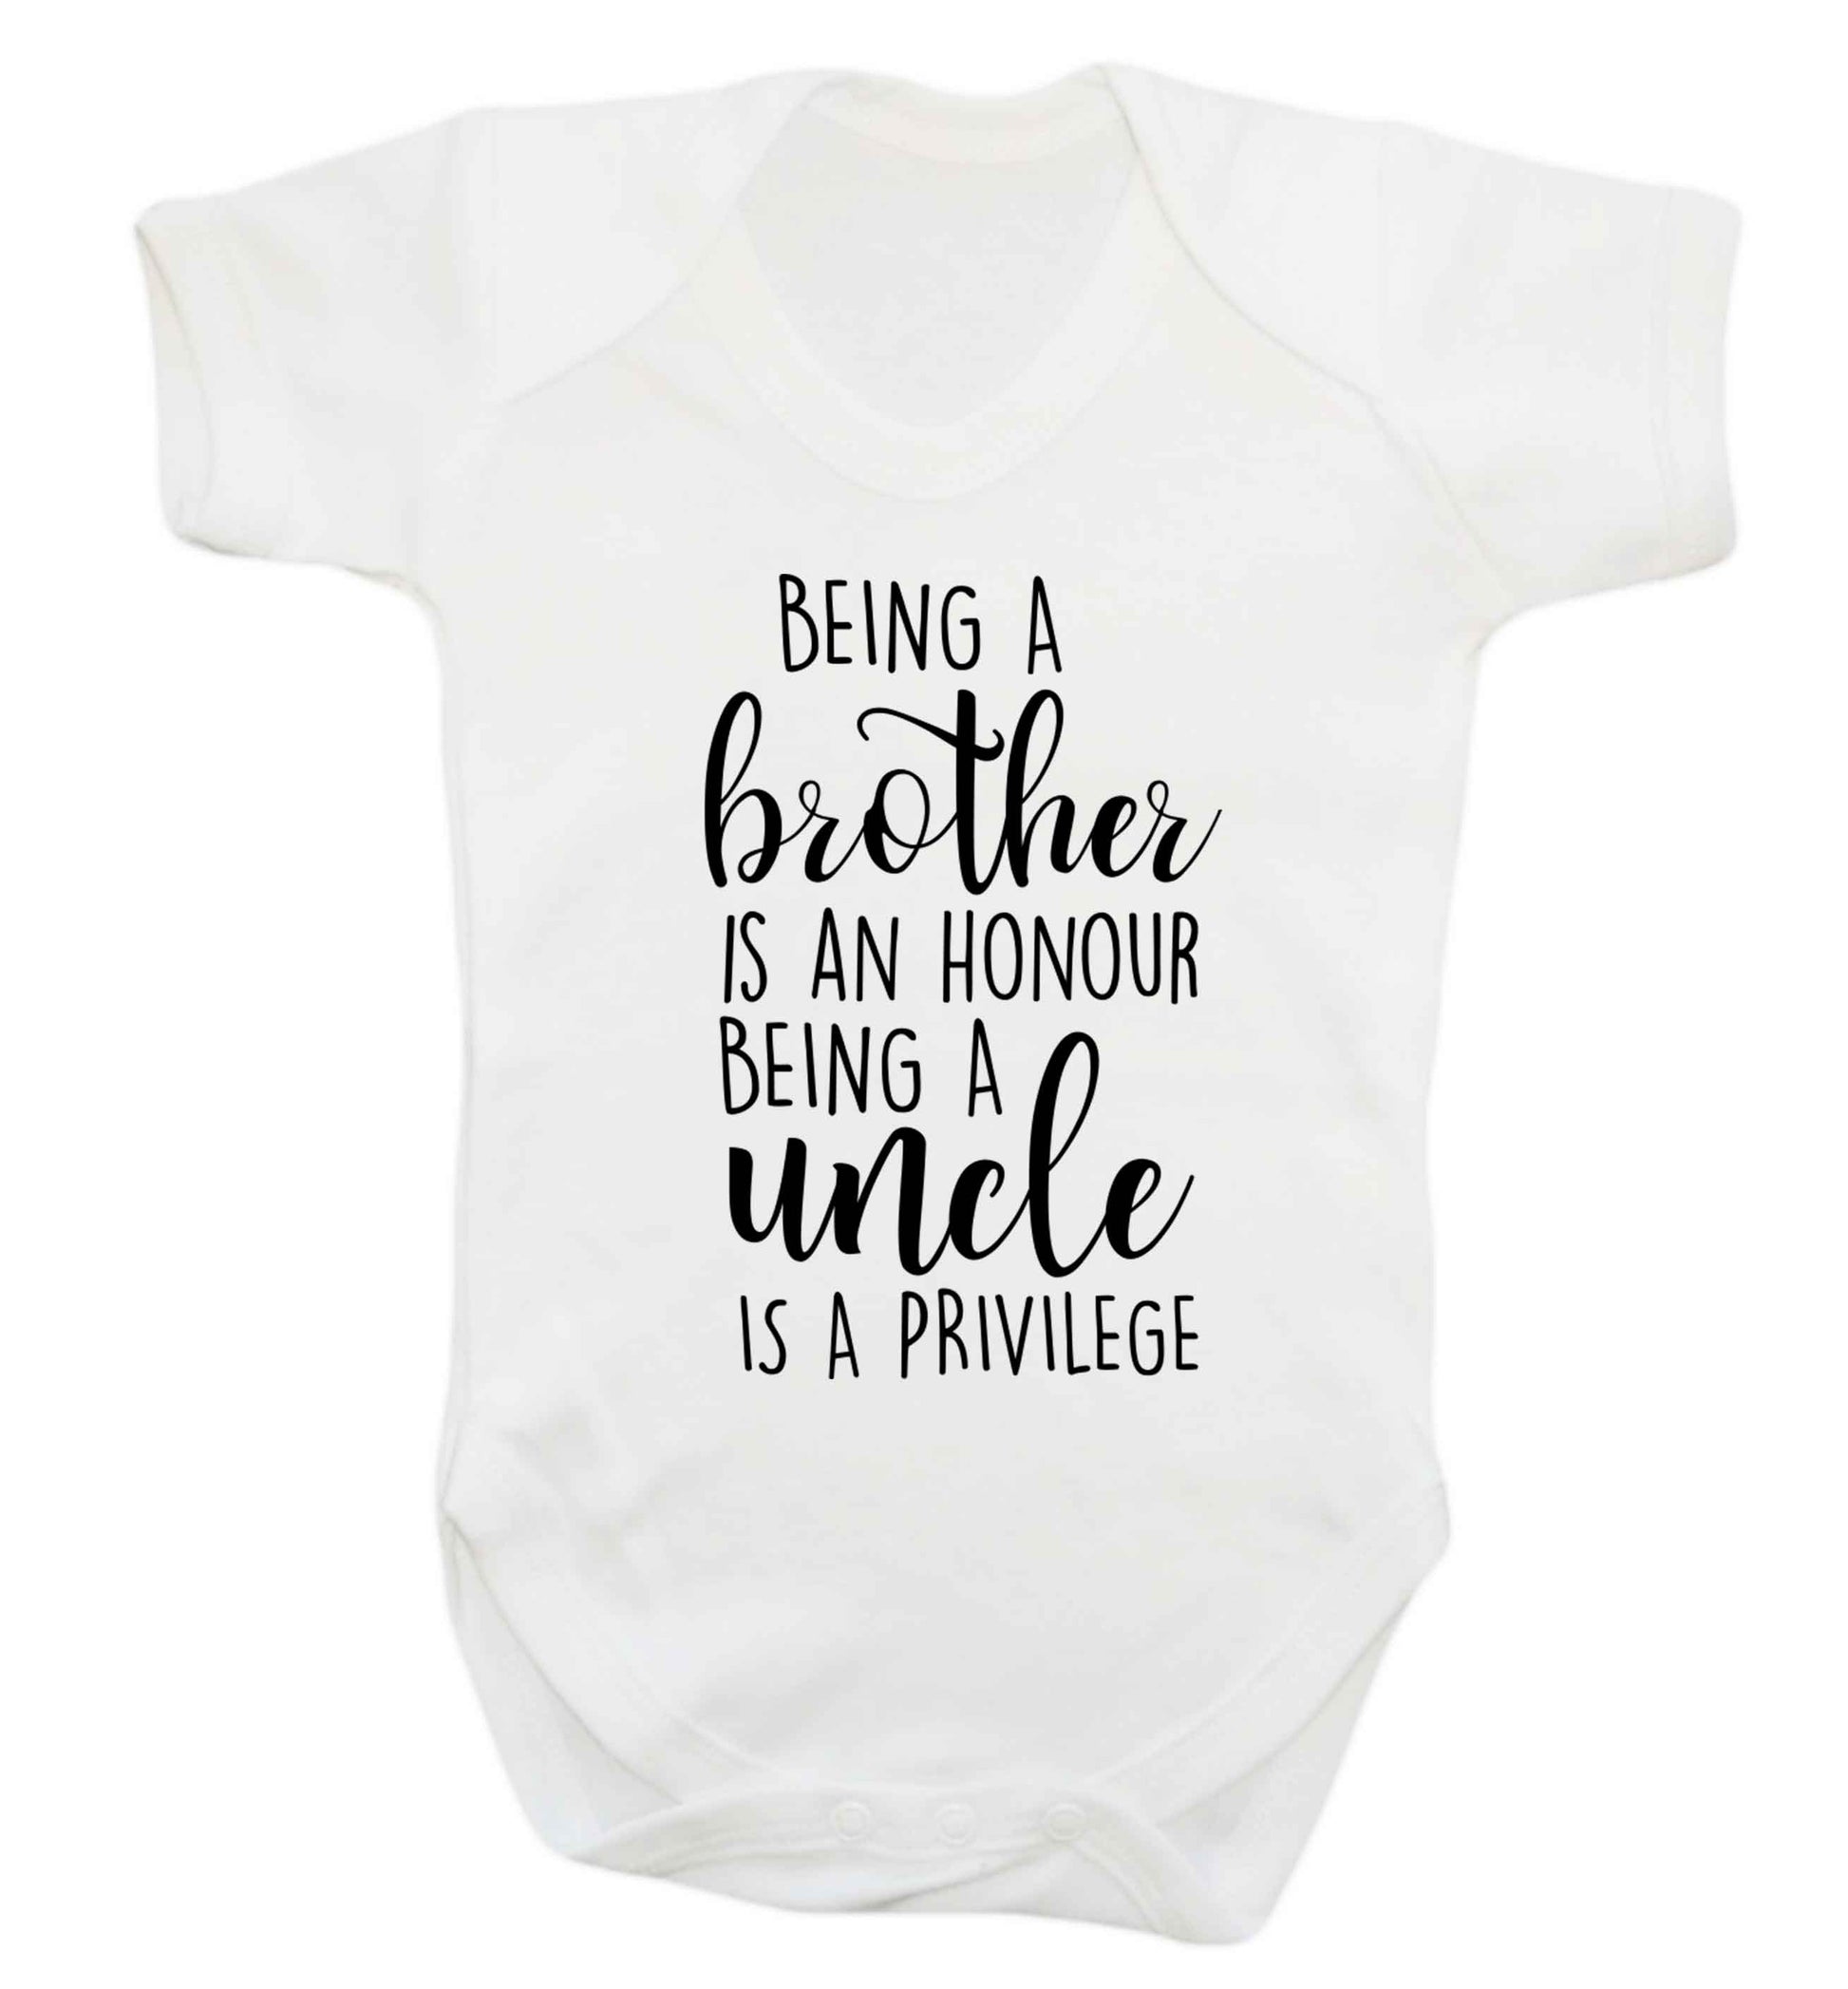 Being a brother is an honour being an uncle is a privilege Baby Vest white 18-24 months